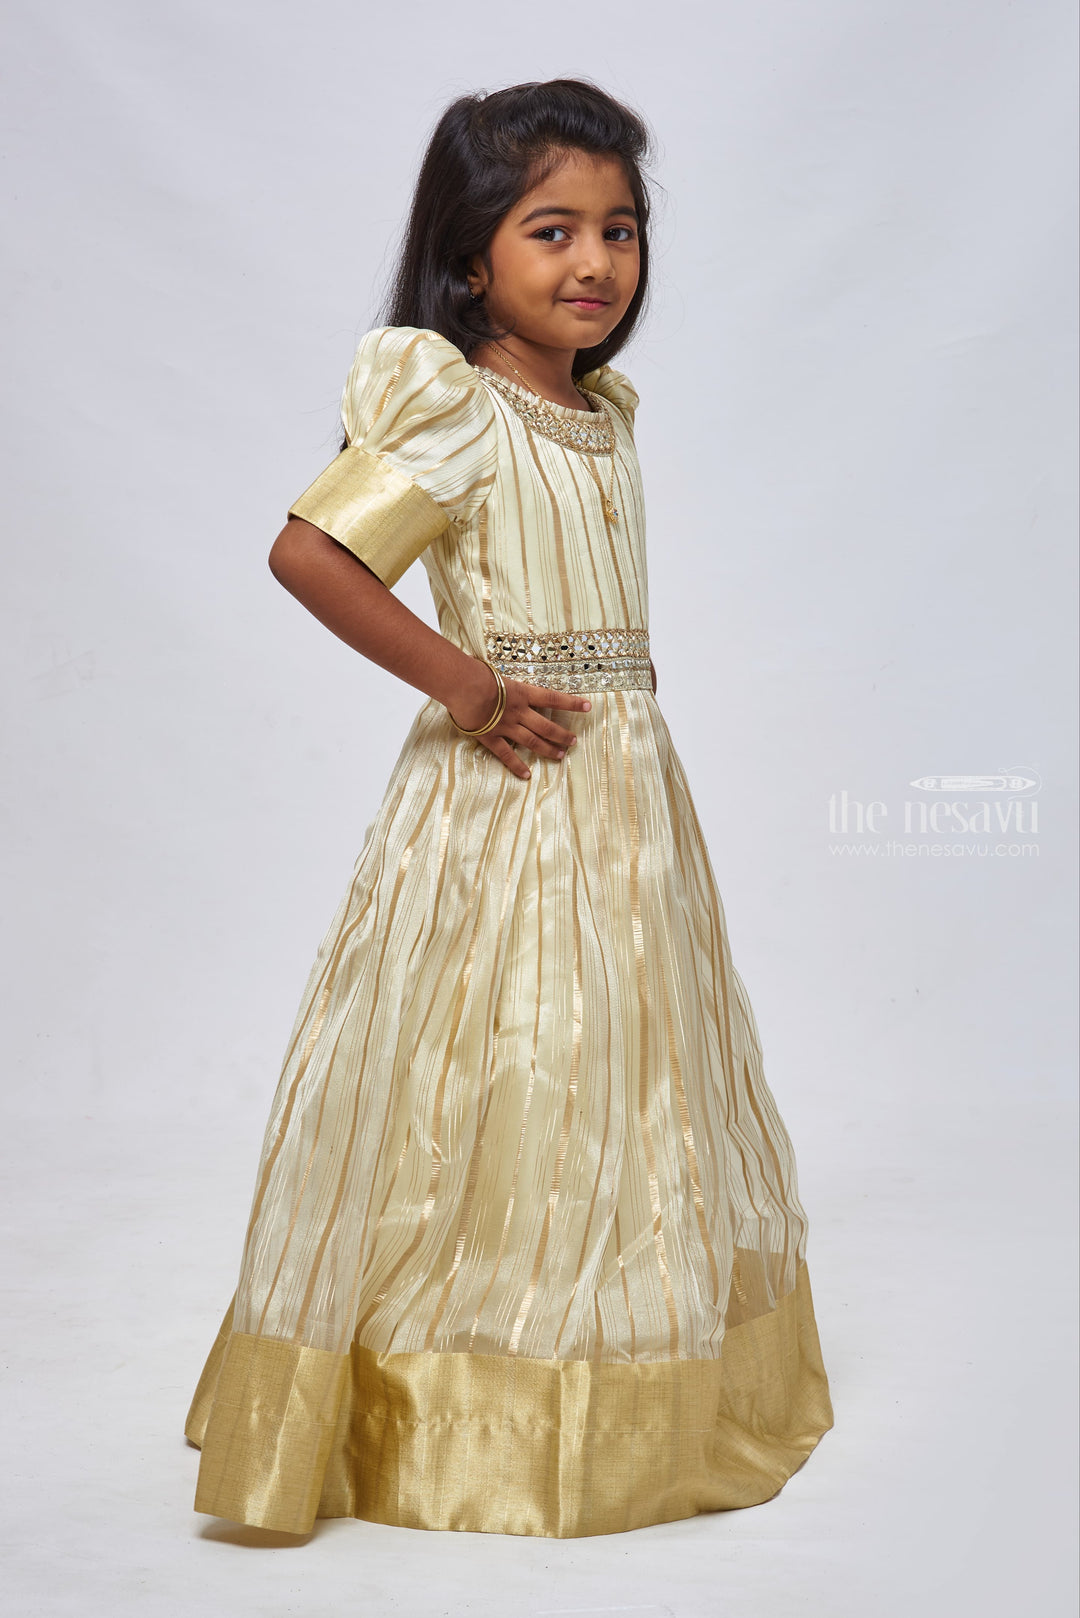 The Nesavu Girls Party Gown Yellow Elegance: Striped Organza Anarkali with Gota Mirror Embroidery for Girls Nesavu Golden Stripe Princess Gown with Puff Sleeves | Perfect for Special Occasions | The Nesavu